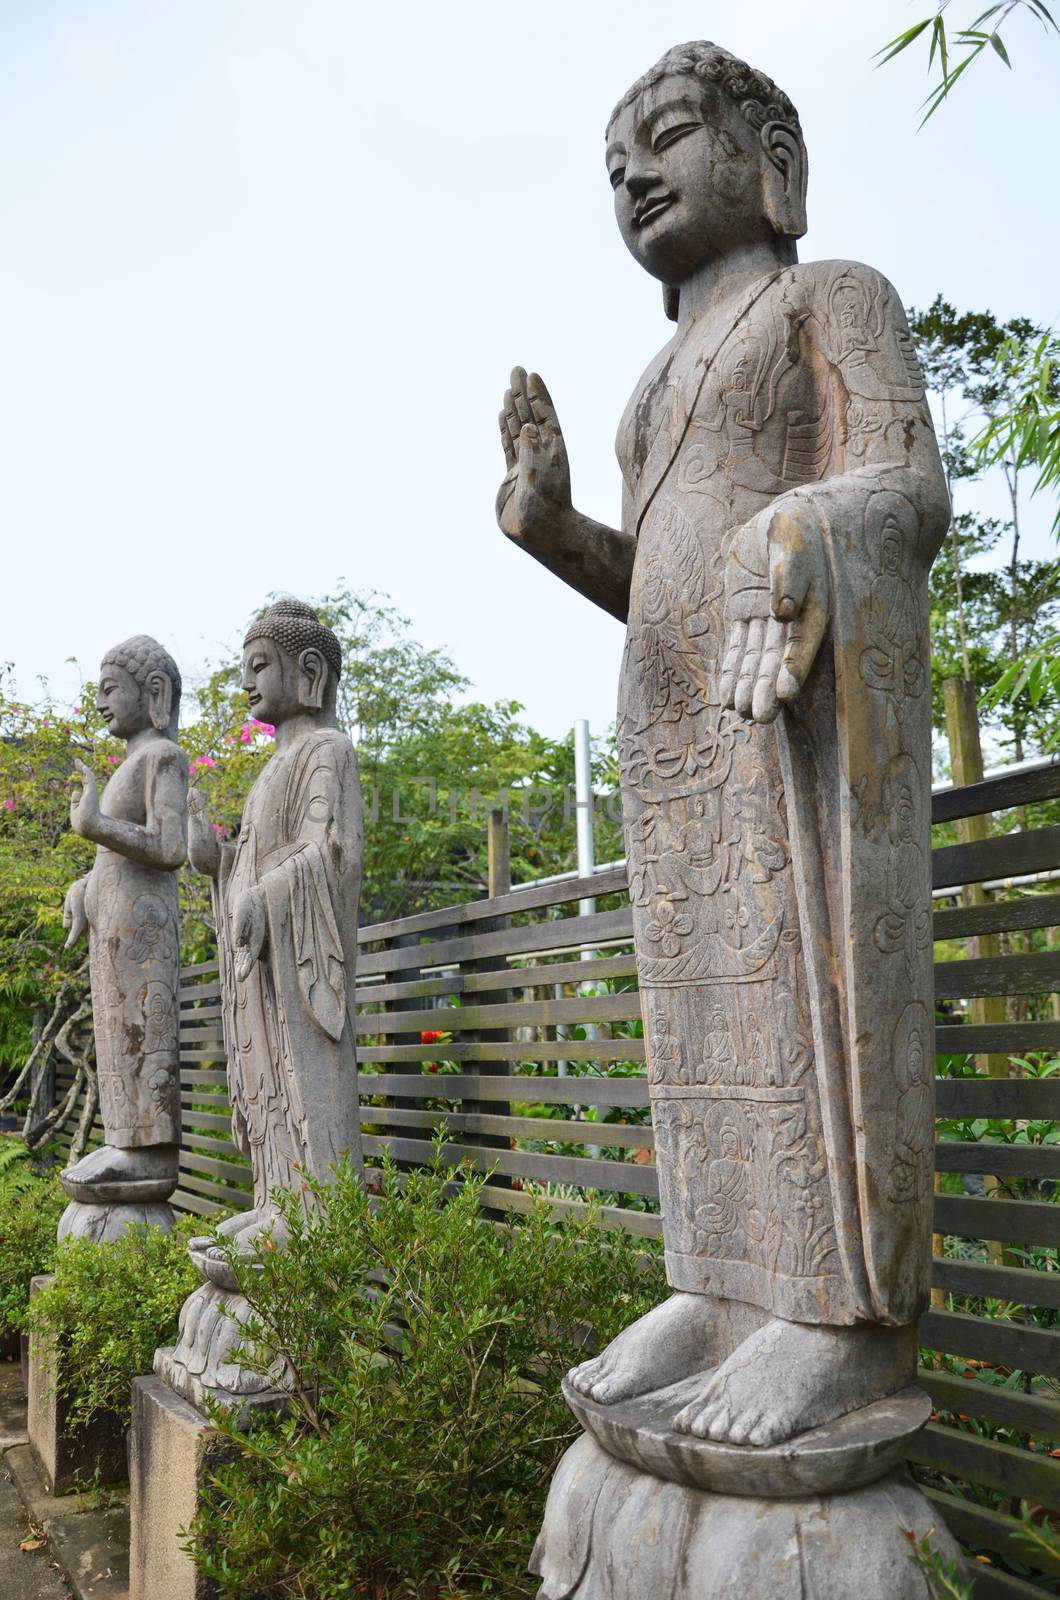 Buddha statues stand in the middle of a lush green garden